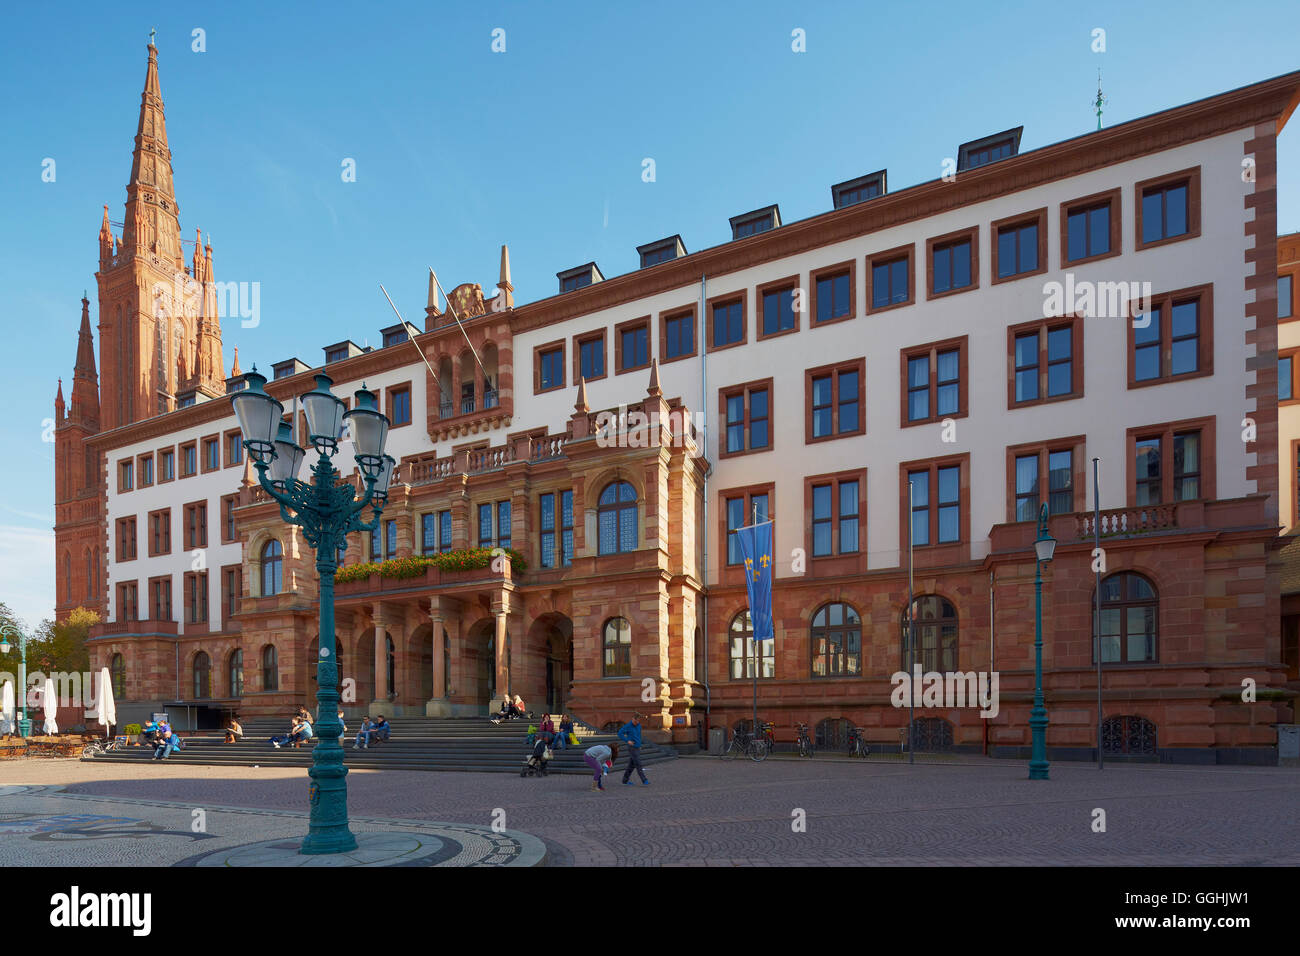 Town hall, Neues Rathaus and church, Marktkirche, on the market square, Wiesbaden, Mittelrhein, Middle Rhine, Hesse, Germany, Eu Stock Photo